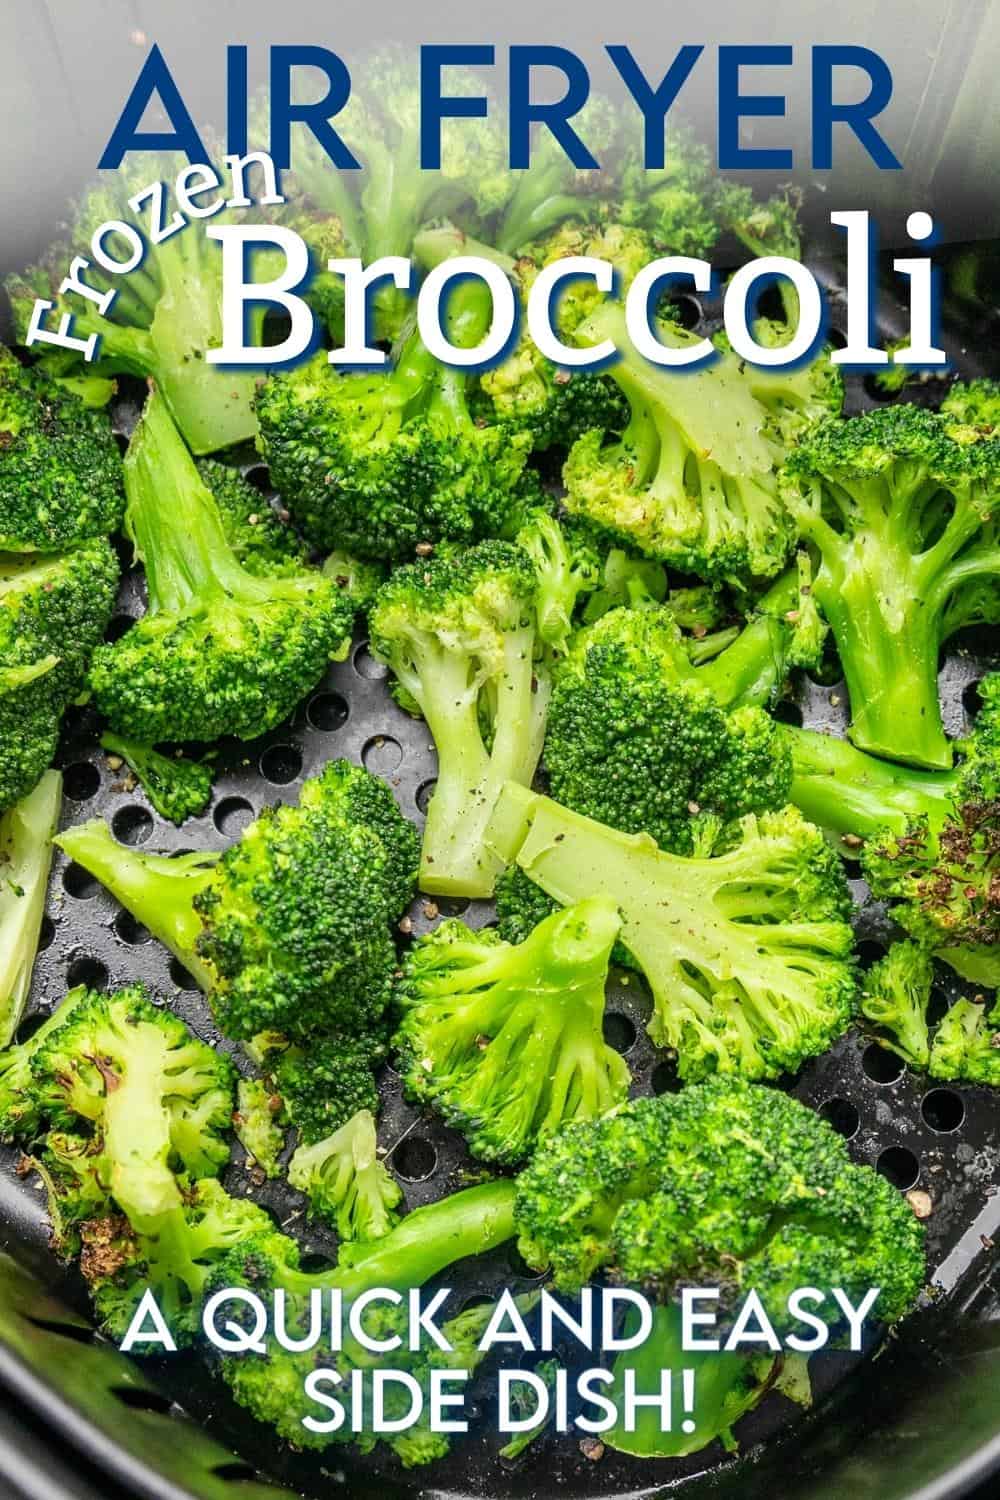 Frozen broccoli from the air fryer